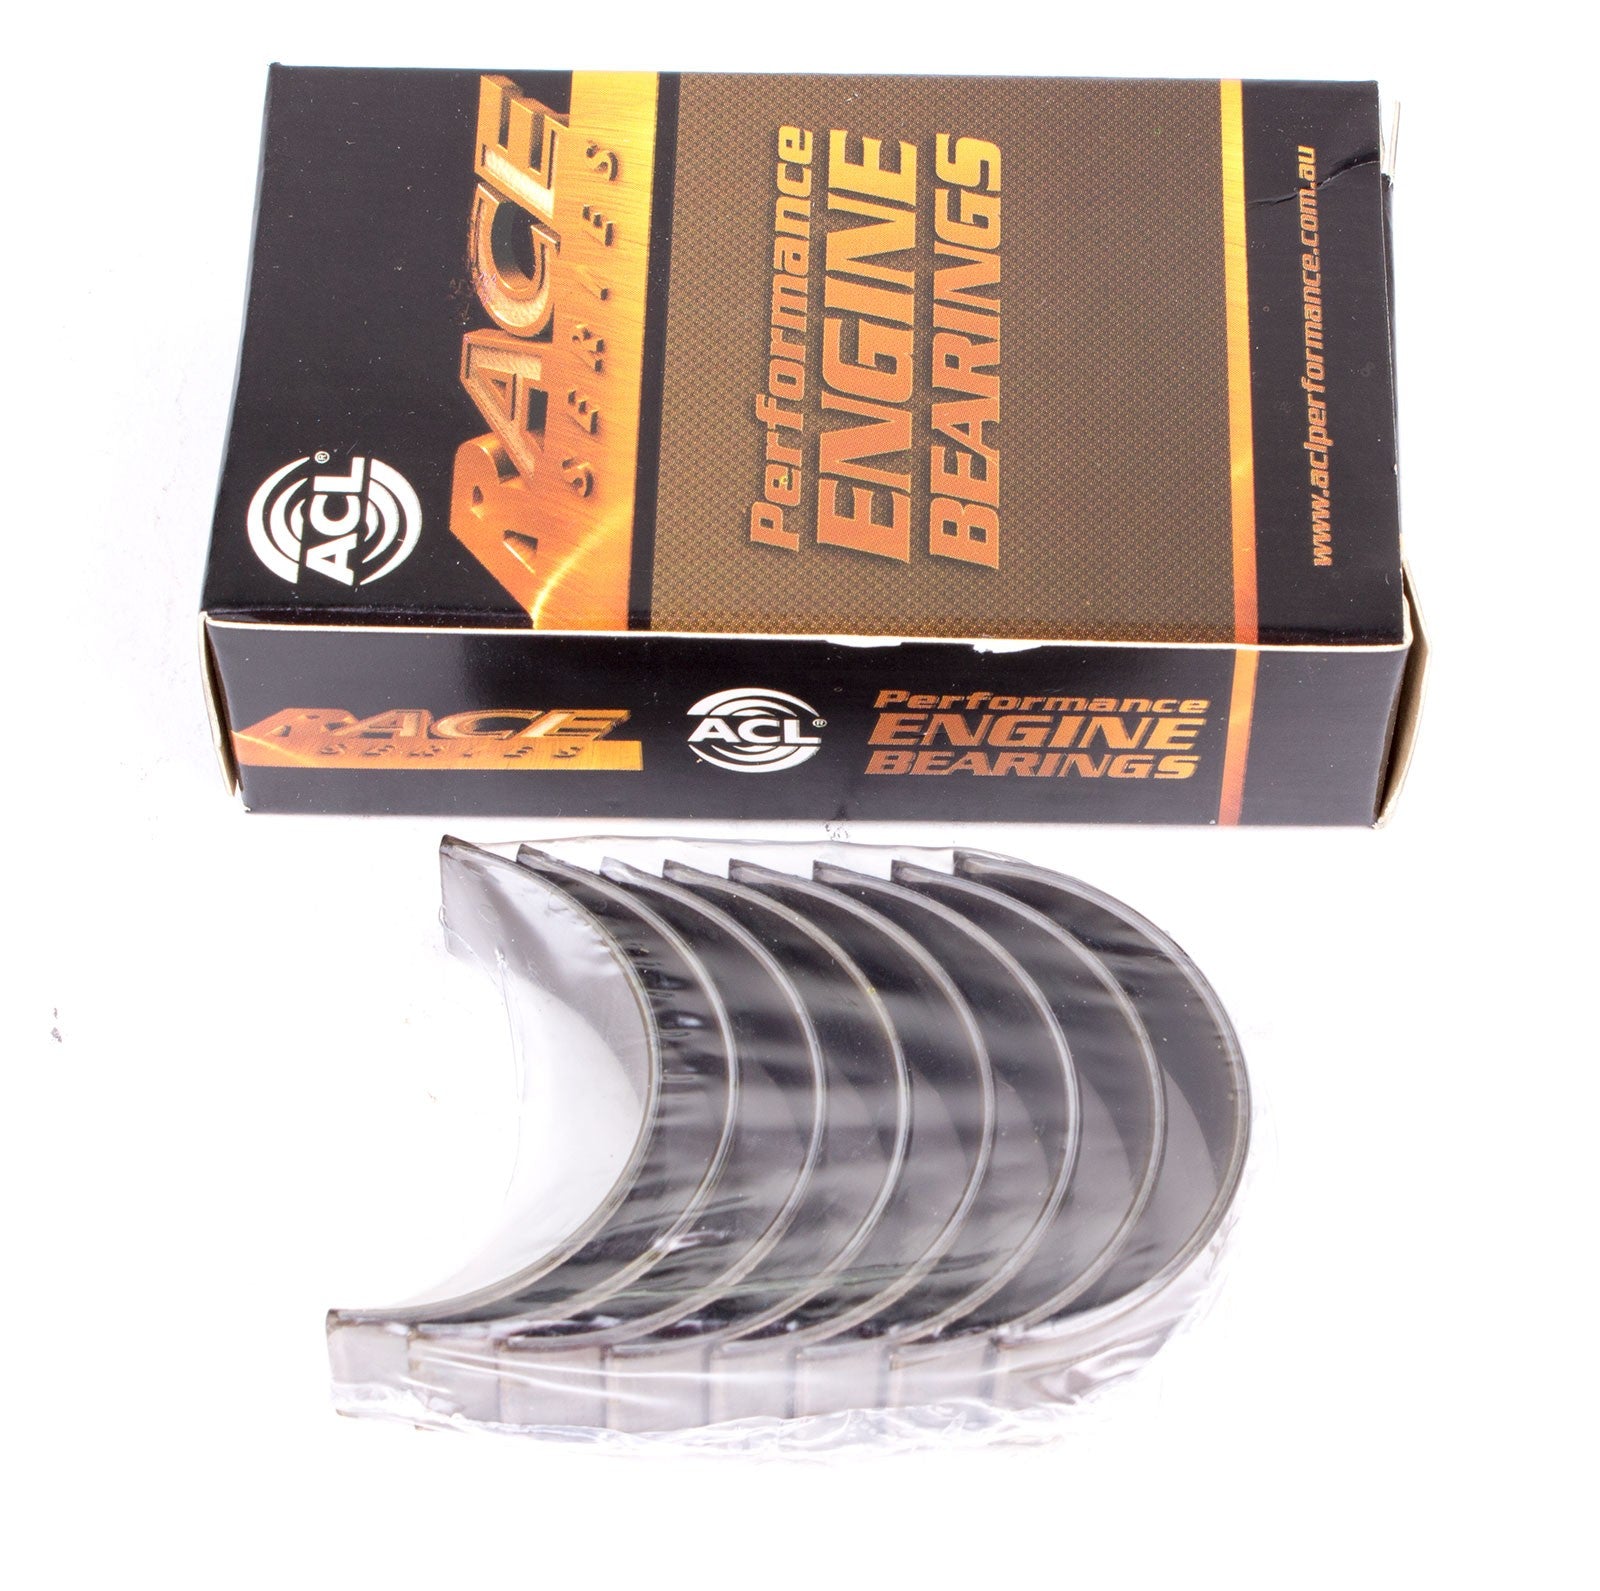 ACL 4B8336H-.50 Con rod bearing set (ACL Race Series) Photo-0 